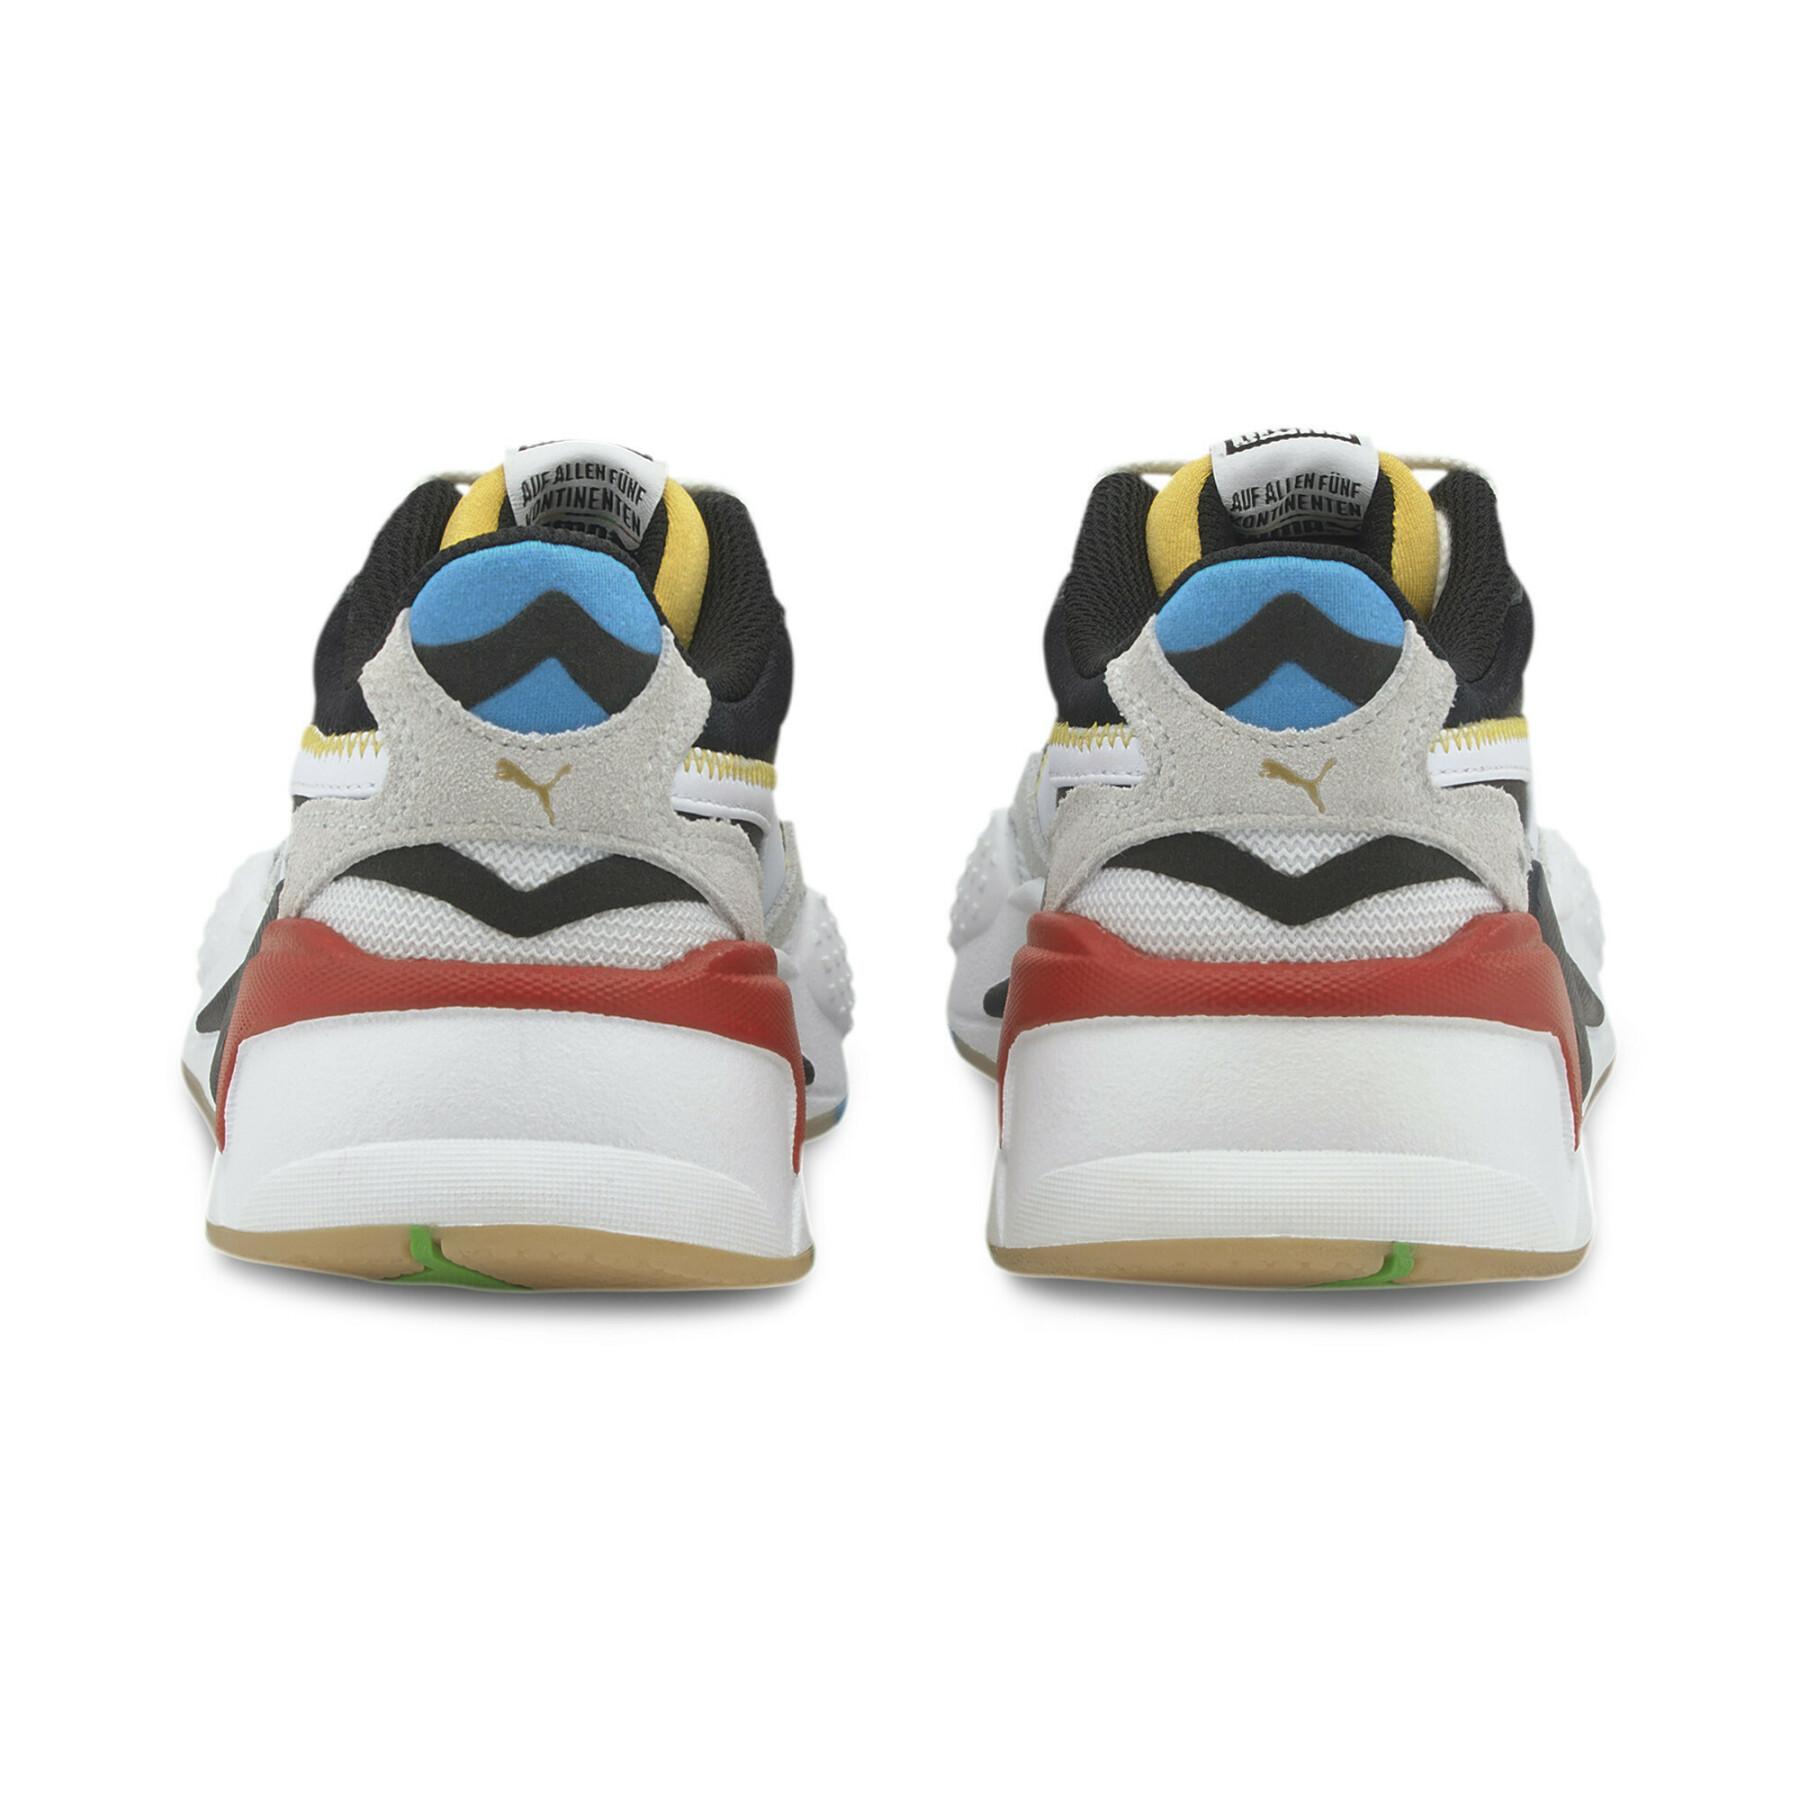 Children's sneakers Puma RS-X³ WH